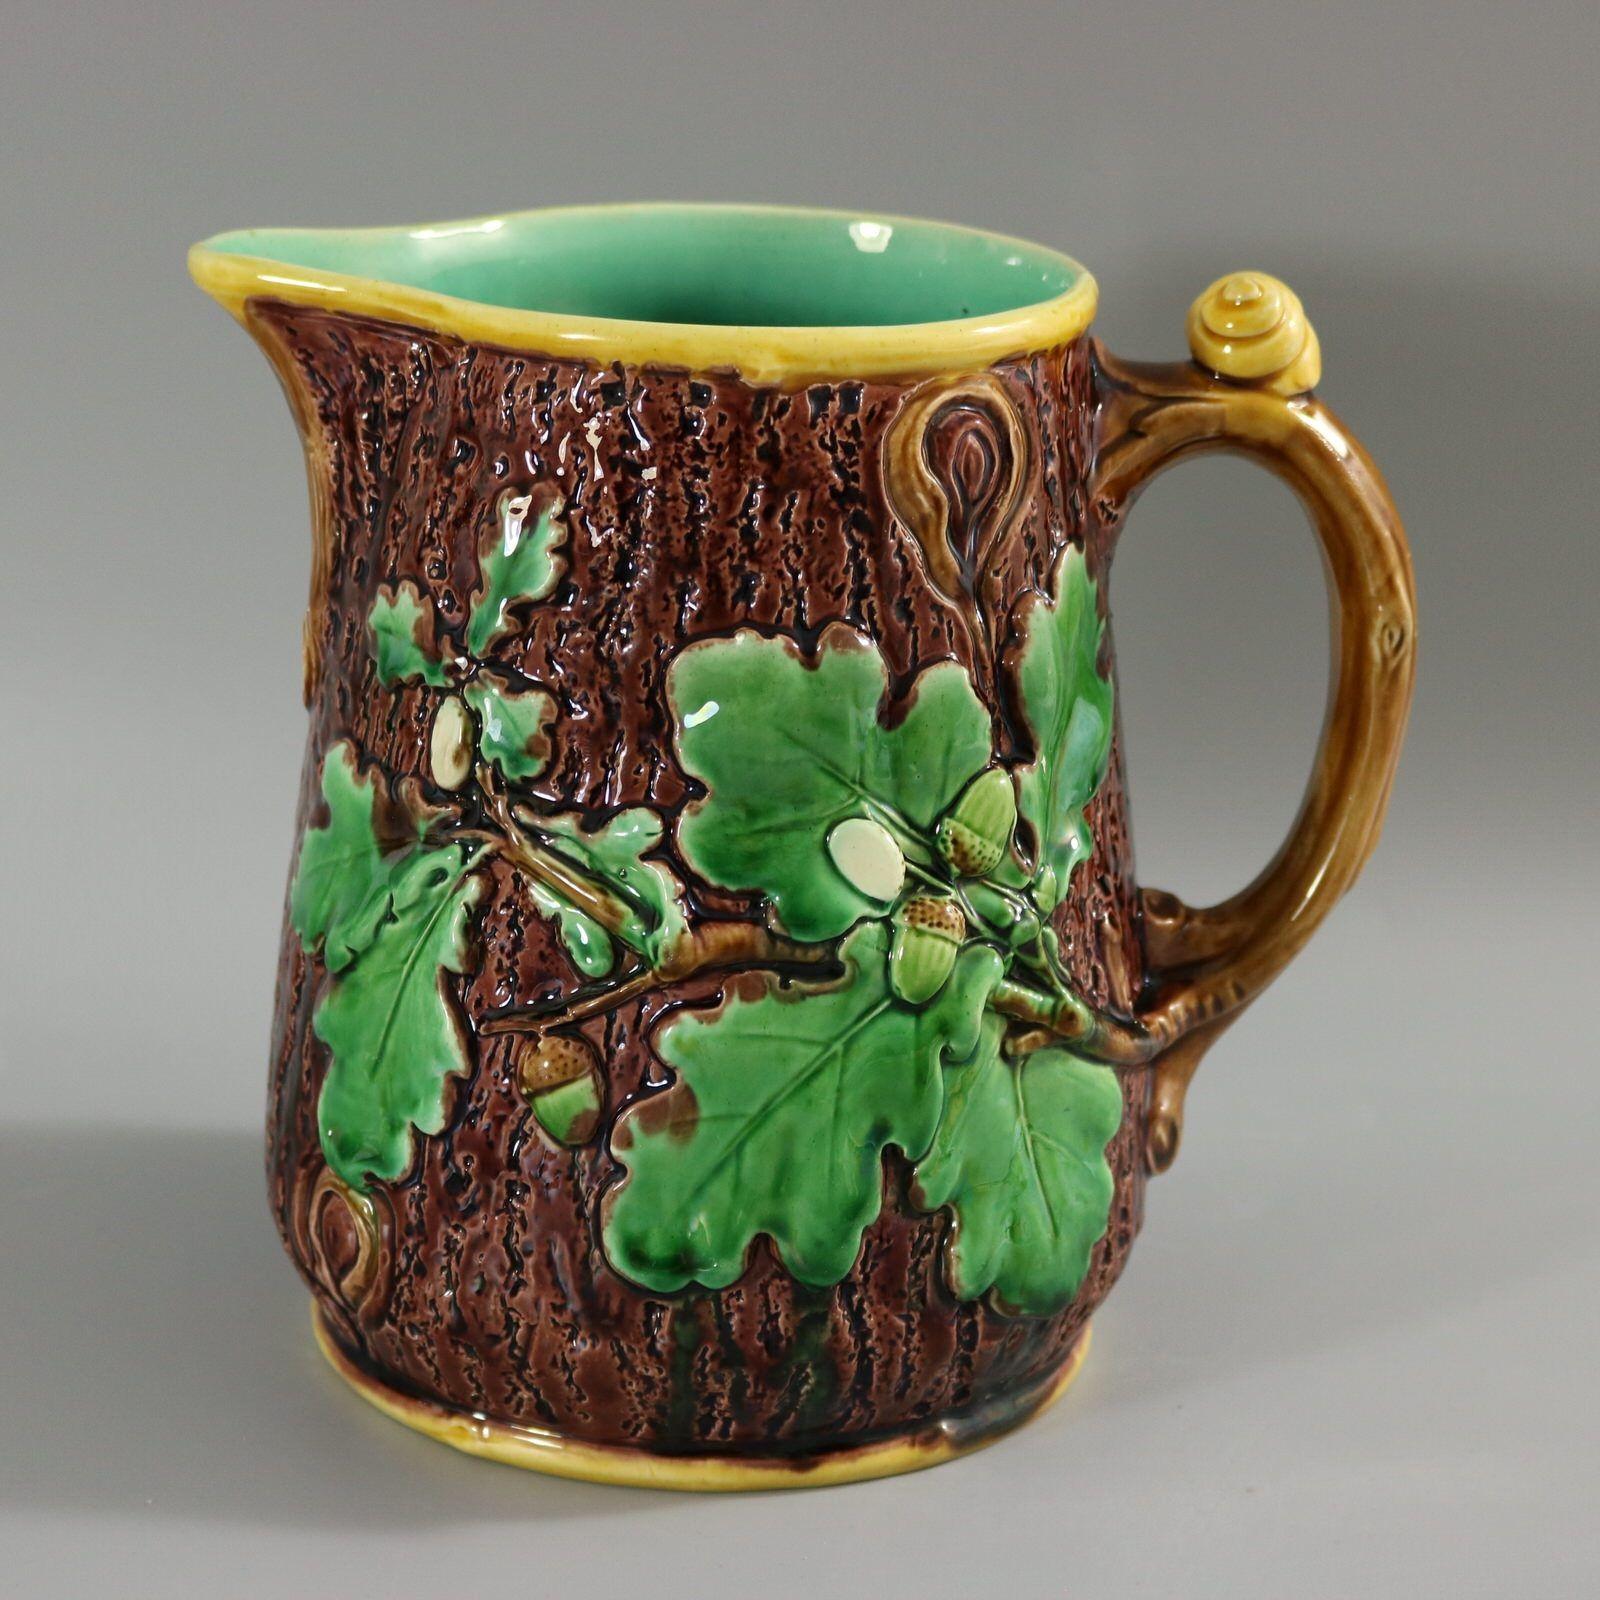 Minton Majolica jug/pitcher which features oak leaves and acorns to the sides and a snail to the handle. Colouration: brown, green, yellow, are predominant. The piece bears maker's marks for the Minton pottery. Bears a pattern number, '553'. Marks